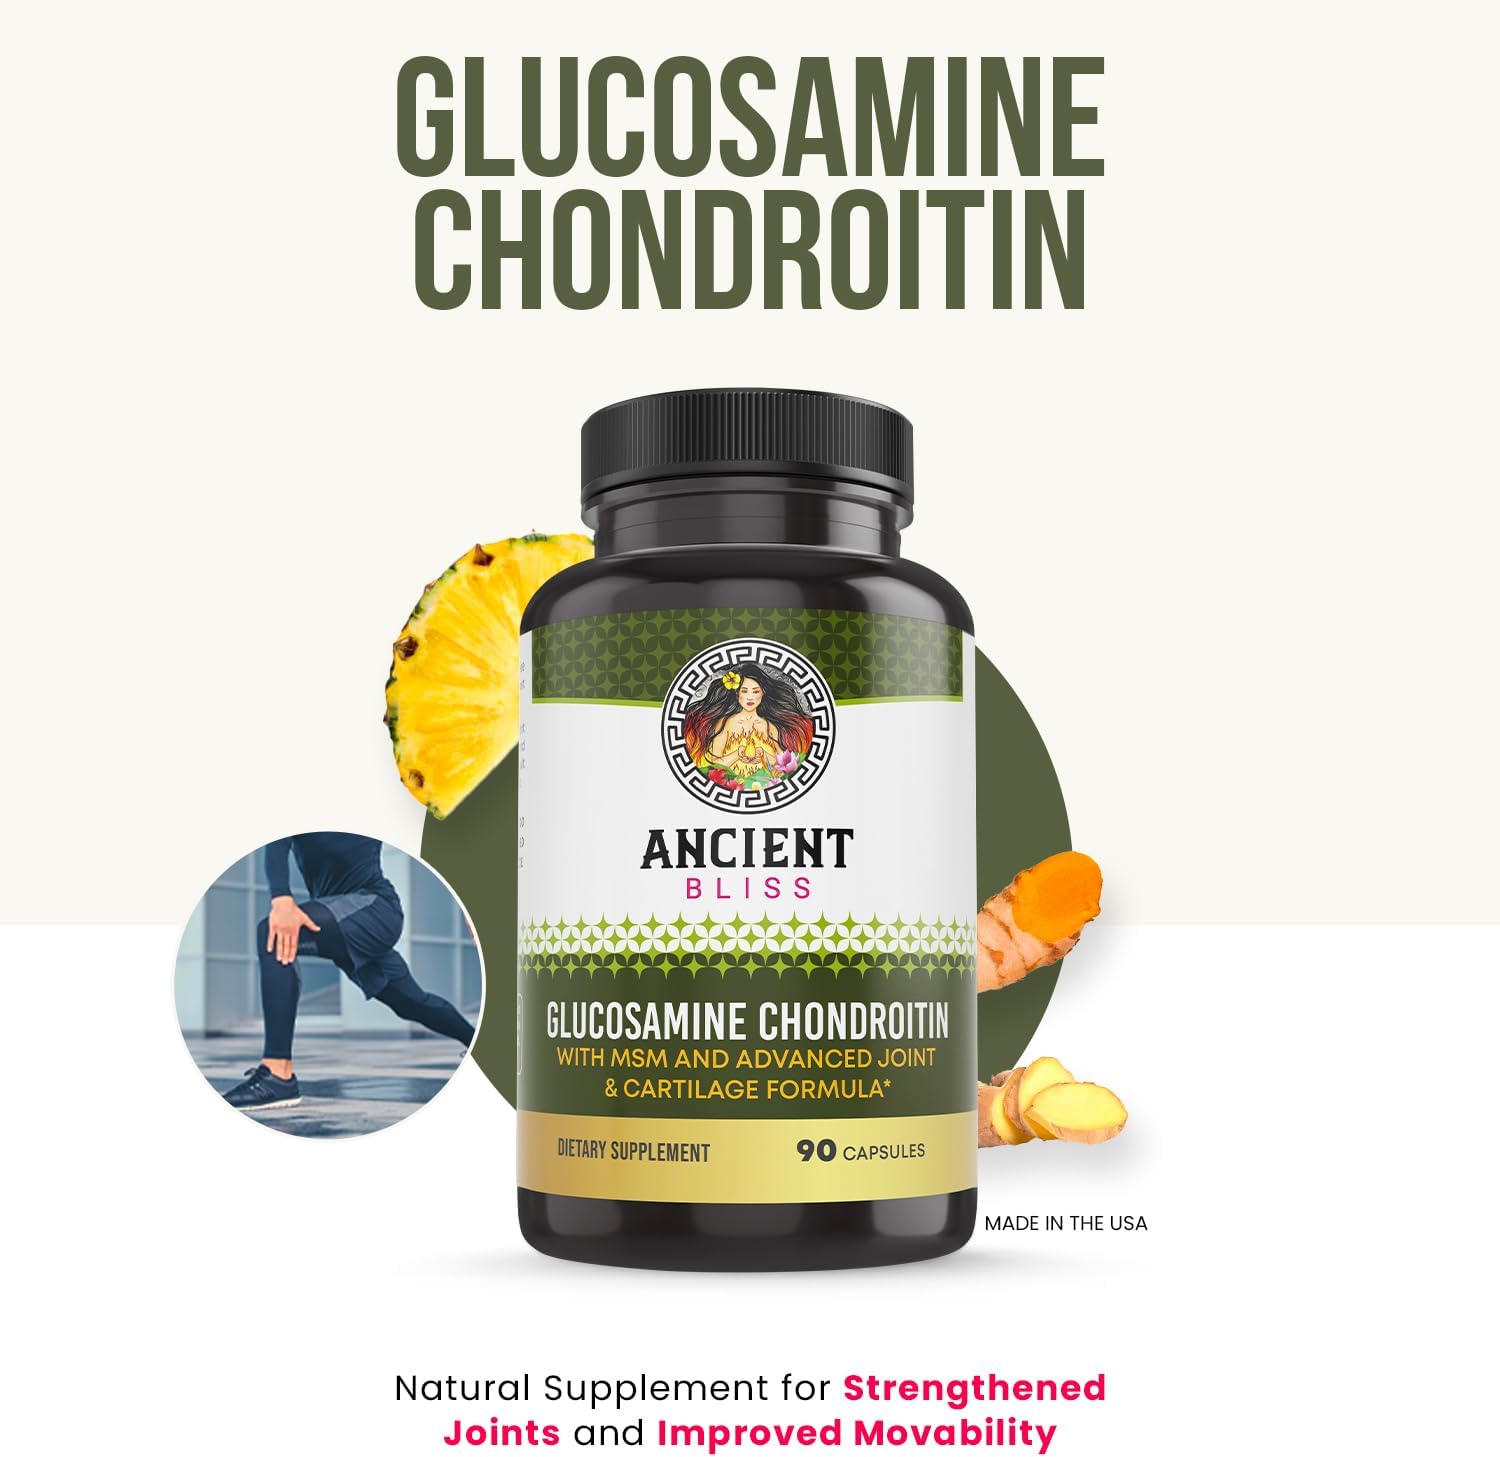 Glucosamine Chondroitin MSM Mobility & Joint Support Supplement for Men & Women with Cartilage Formula for Joint Support by Ancient Bliss (90 Capsules) : Health & Household